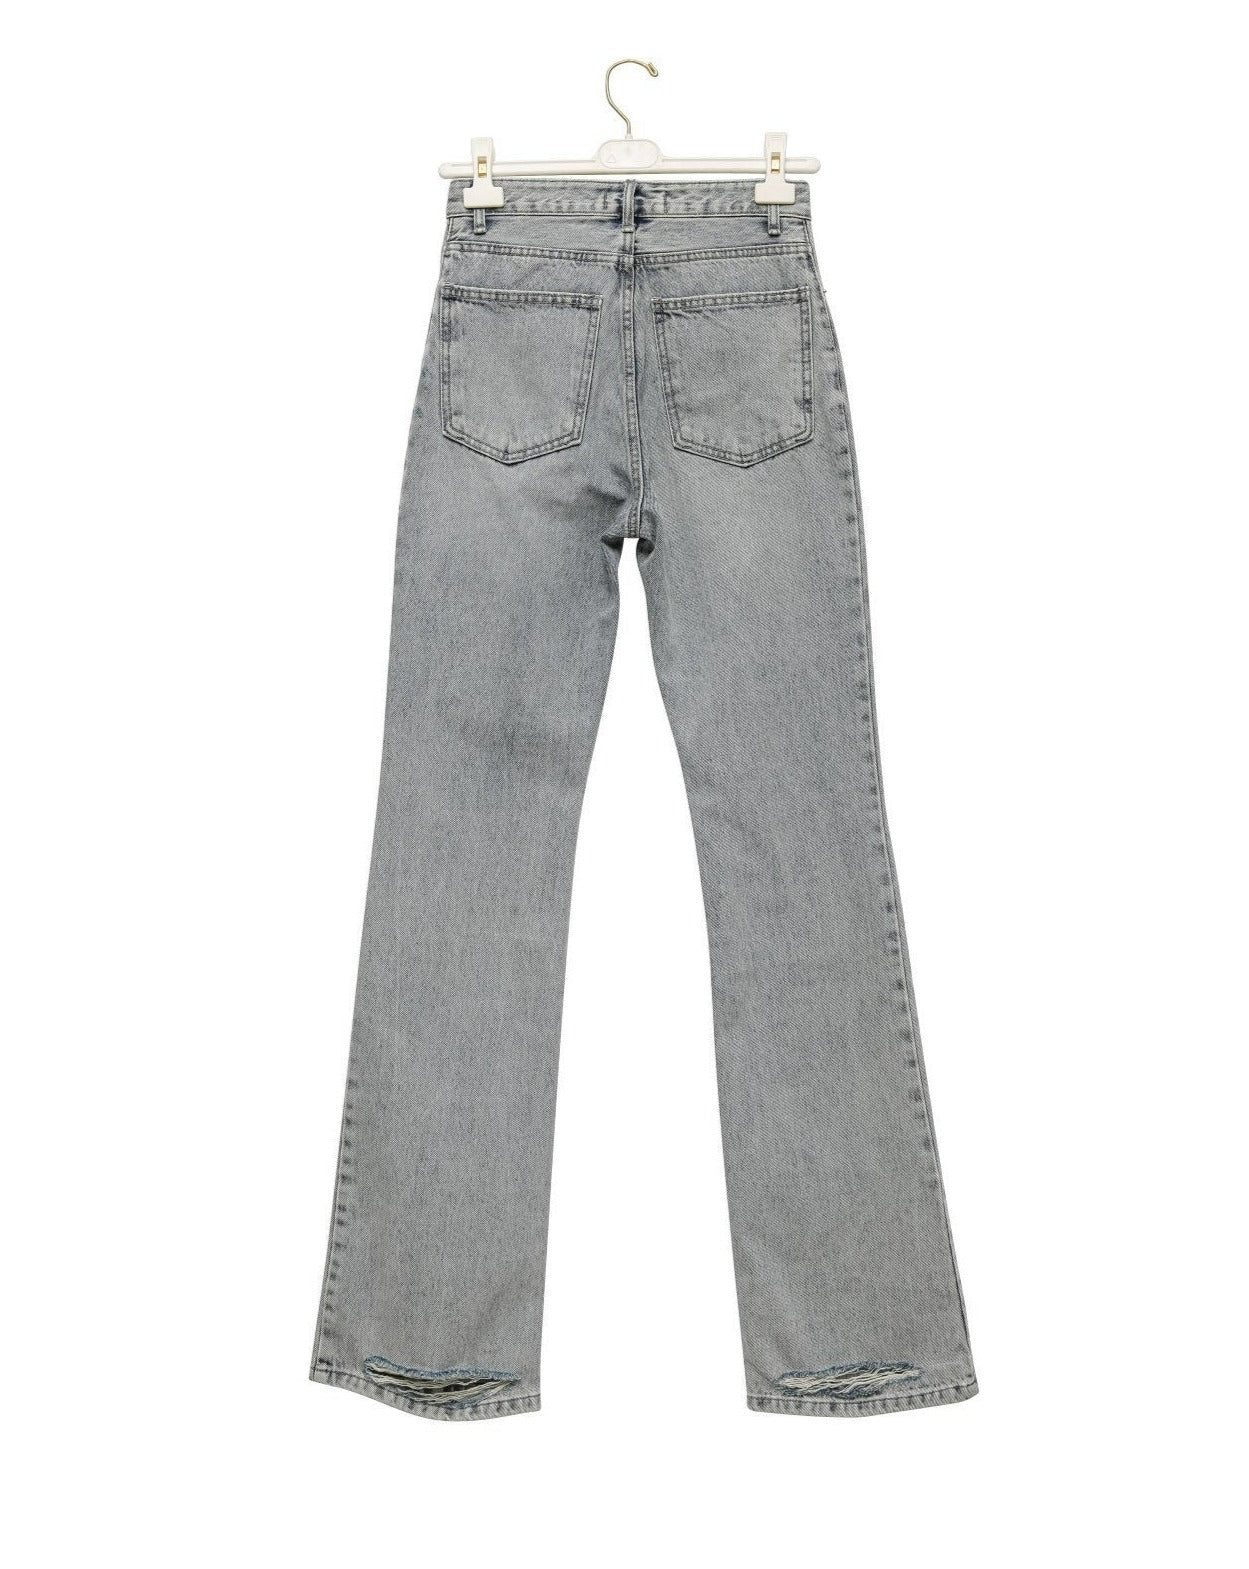 【PAPERMOON 페이퍼 문】SS / Straight Boots Cut X - Ray Jeans